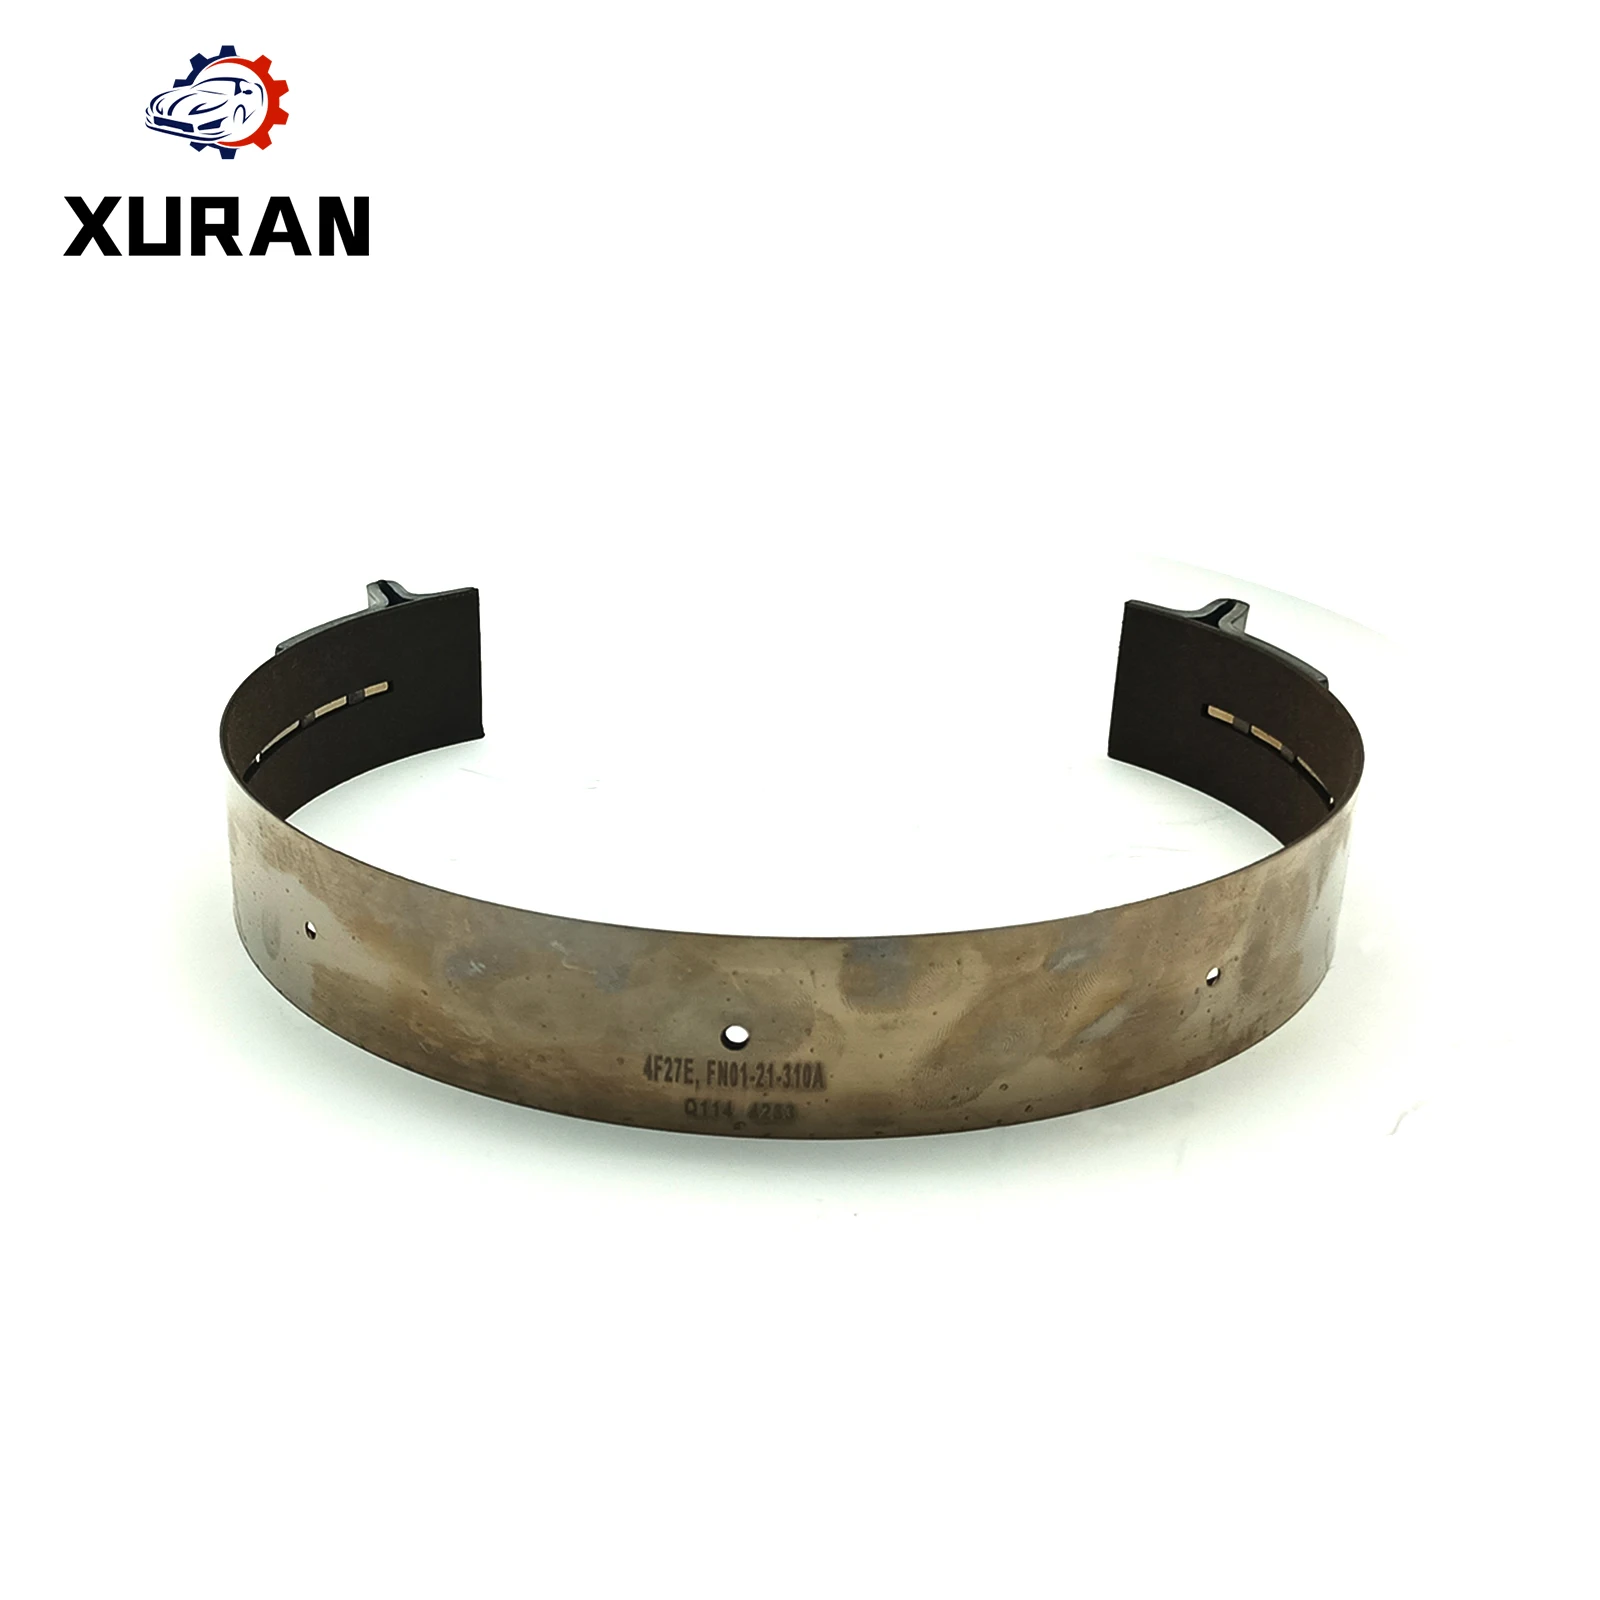 

Auto Transmission 4F27E FN4A-EL Gearbox Brake Band 4N01-21-310A Fit For Ford Mazda Car Accessories